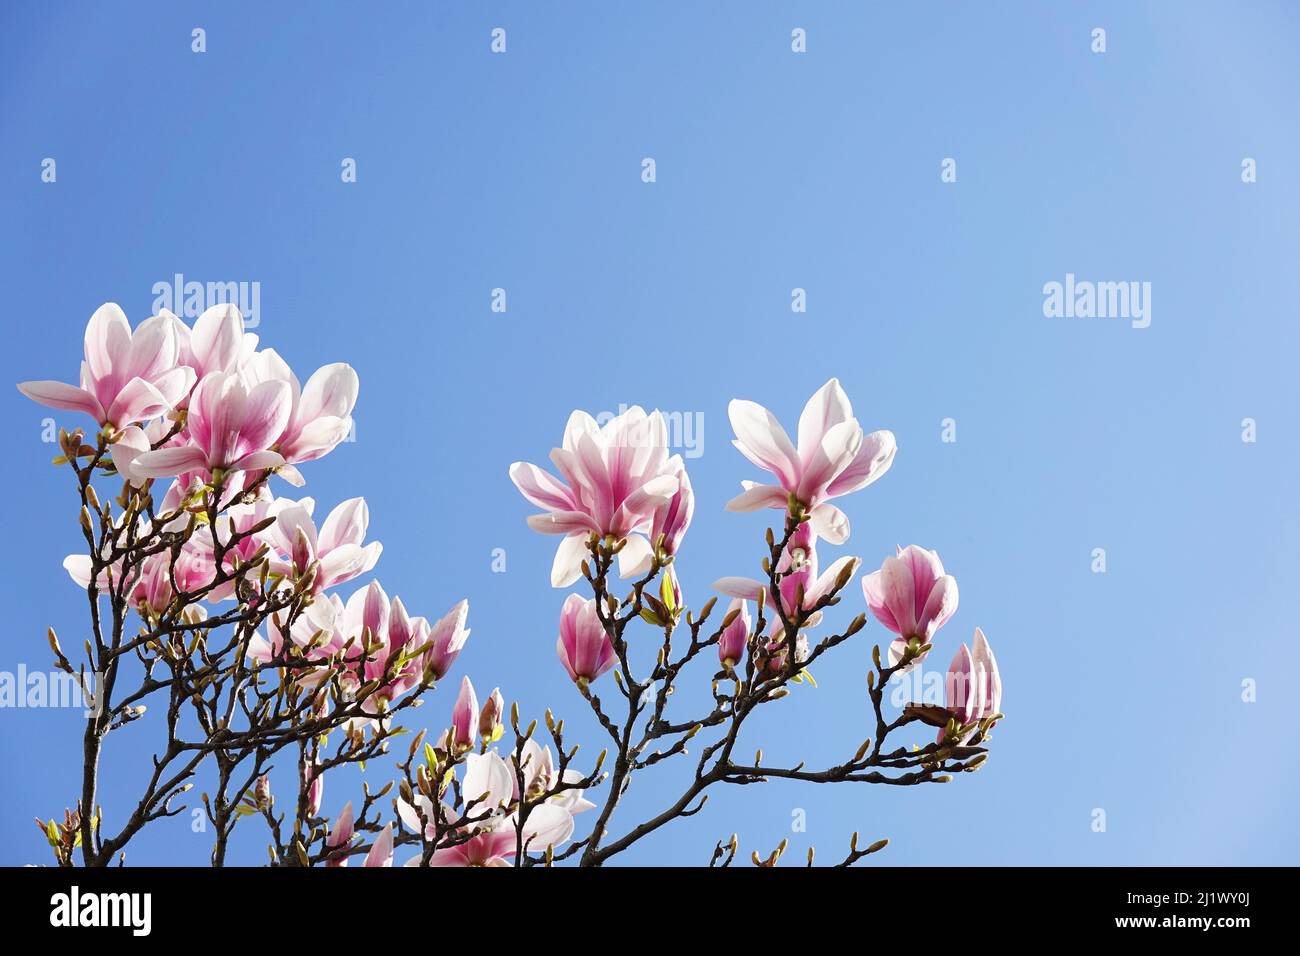 magnolia tree with pink blossoms against blue sky Stock Photo